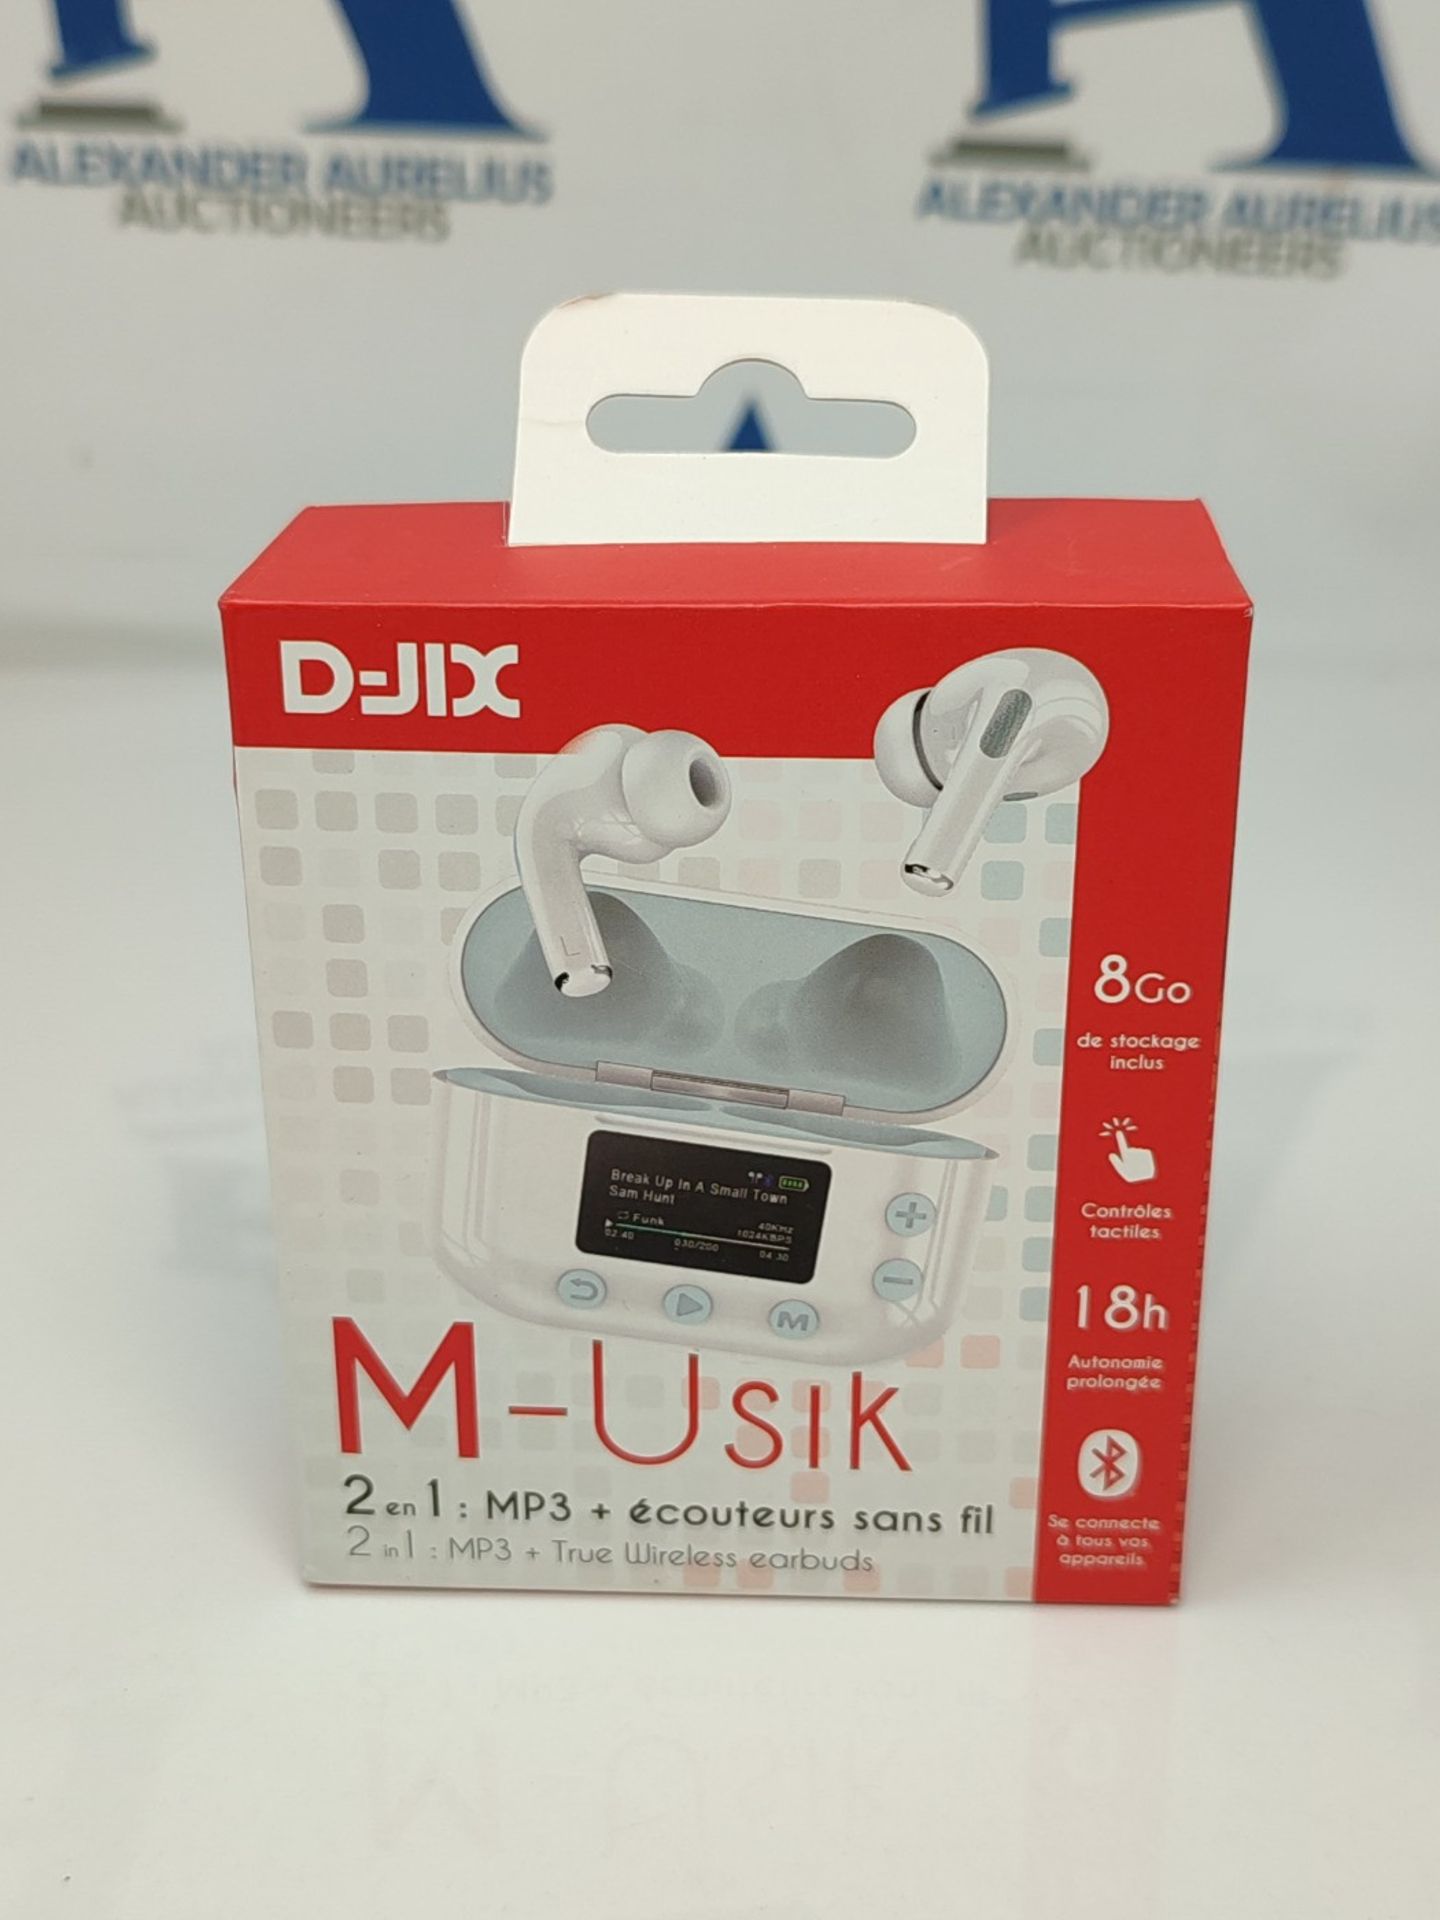 D-Jix - Wireless Bluetooth Earphones M-Usik Player - 2 in 1 Device Wireless Bluetooth - Image 2 of 6